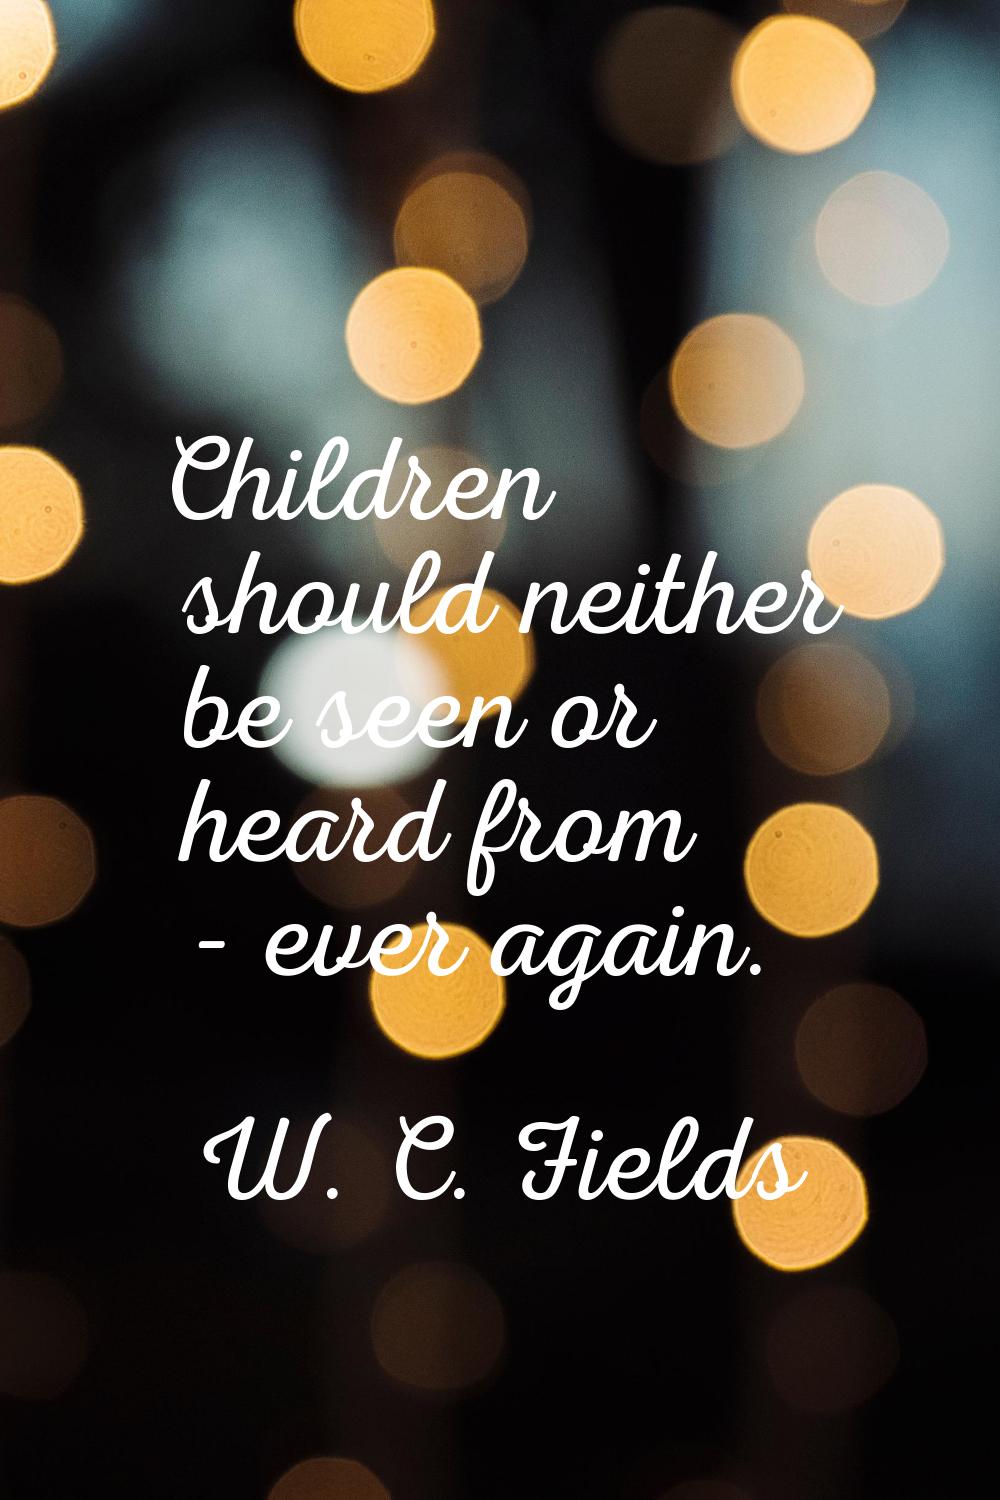 Children should neither be seen or heard from - ever again.